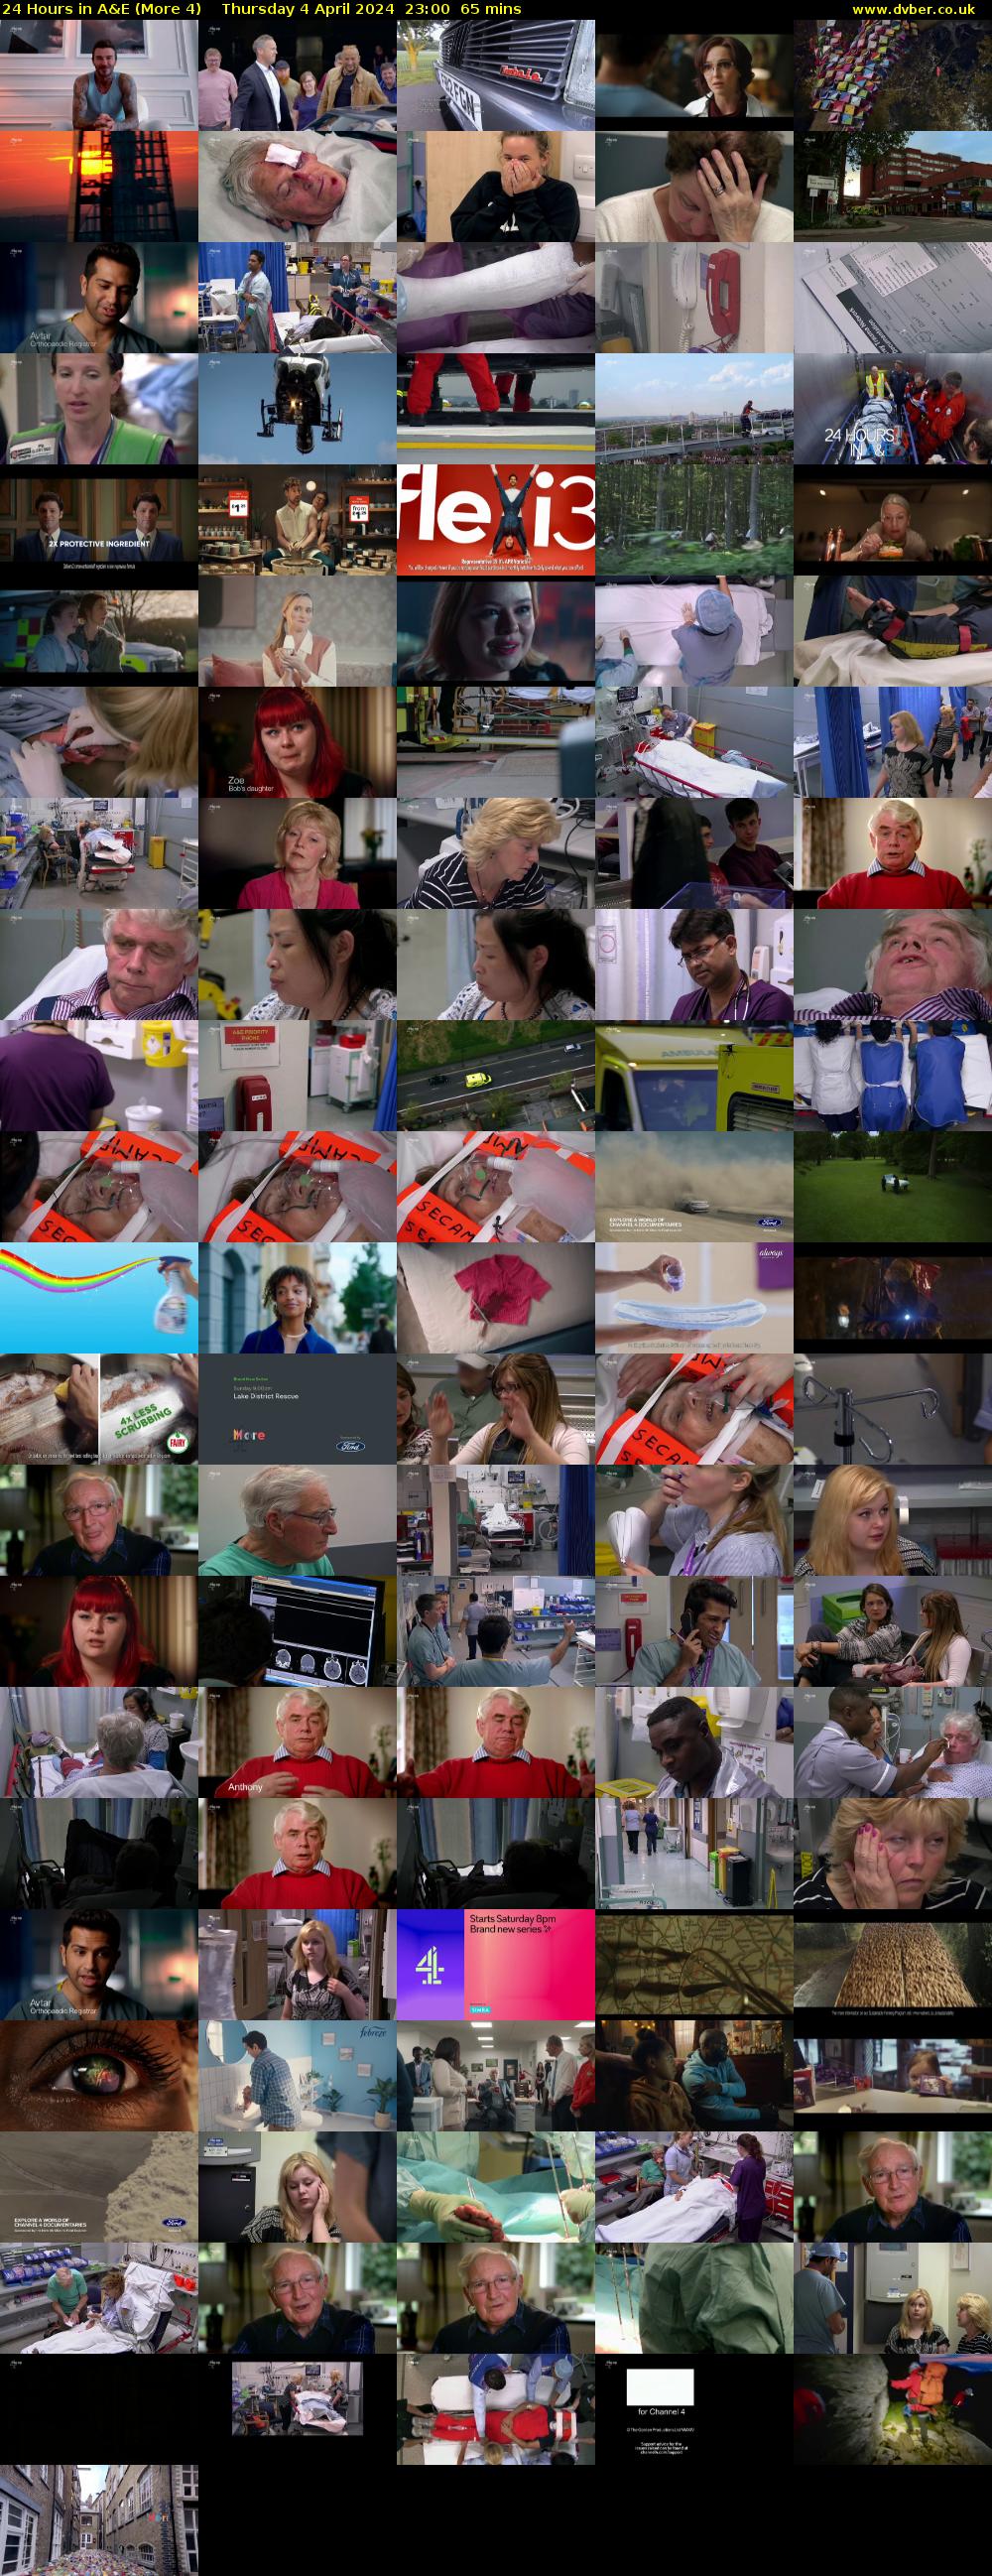 24 Hours in A&E (More 4) Thursday 4 April 2024 23:00 - 00:05